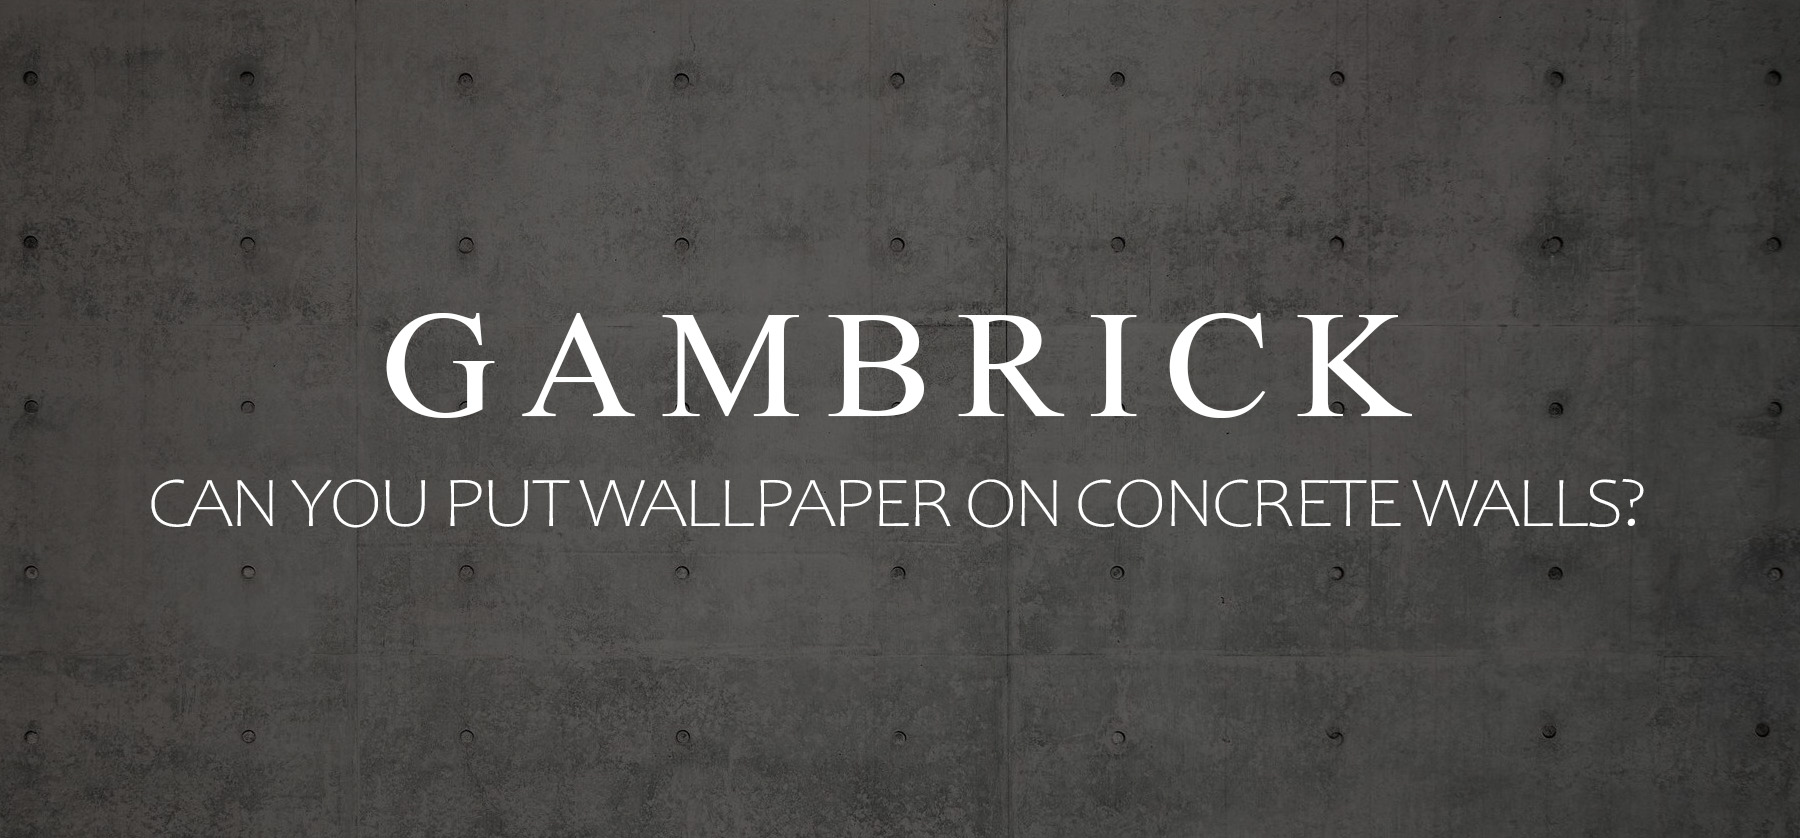 Can You Put Wallpaper On Concrete Walls?